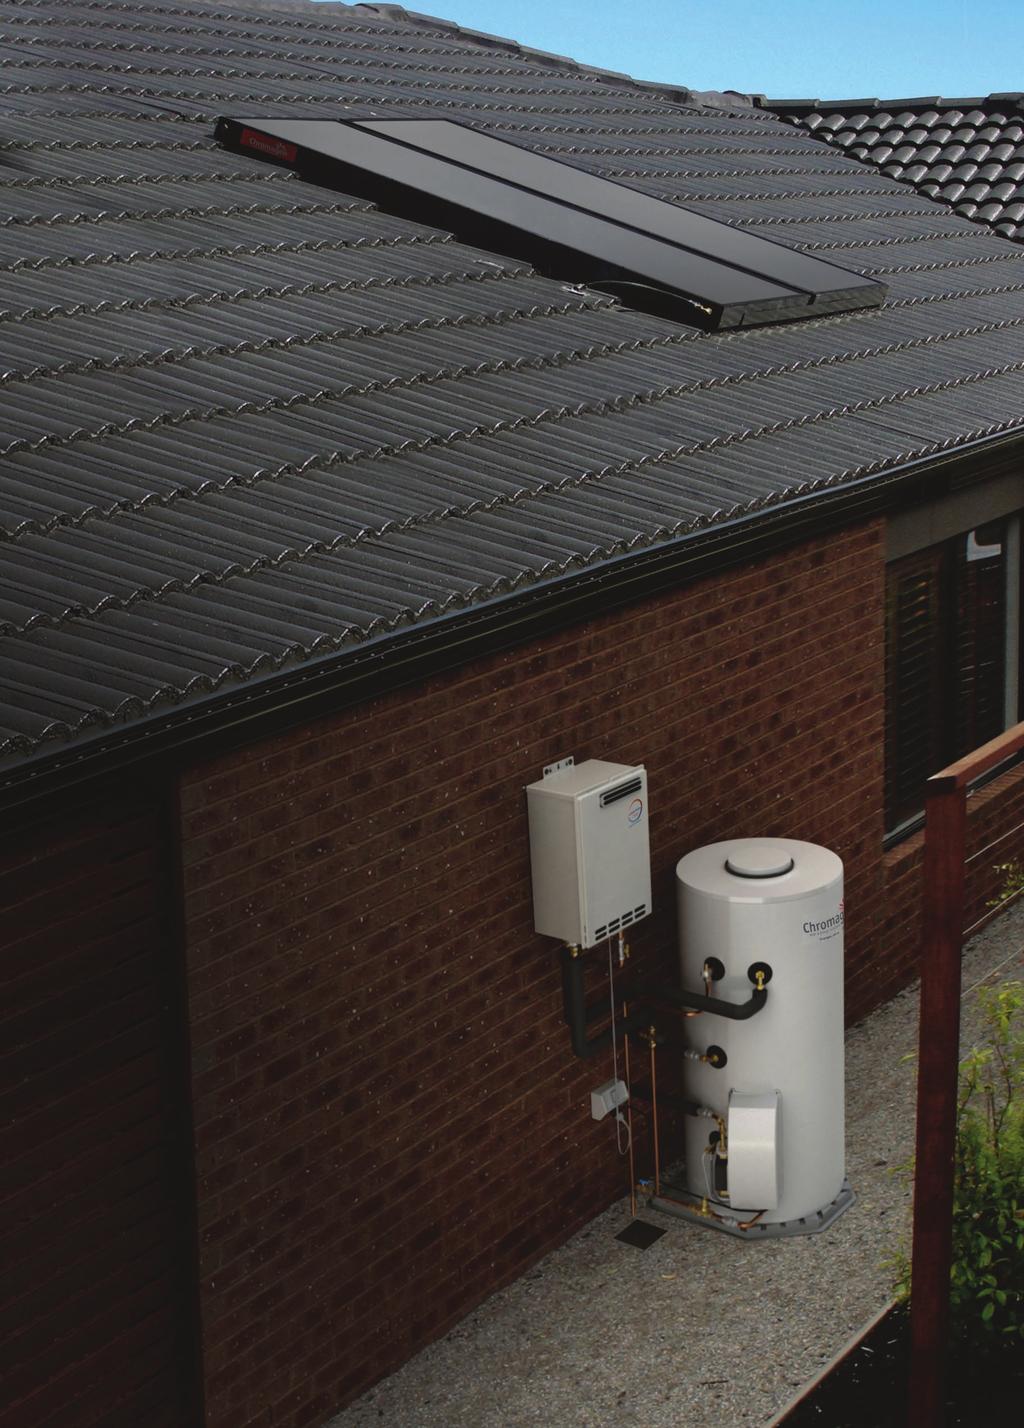 Split Configured Systems Chromagen s split configured solar hot water systems consist of a ground mounted tank and roof mounted collectors, and have been designed to provide energy efficient water